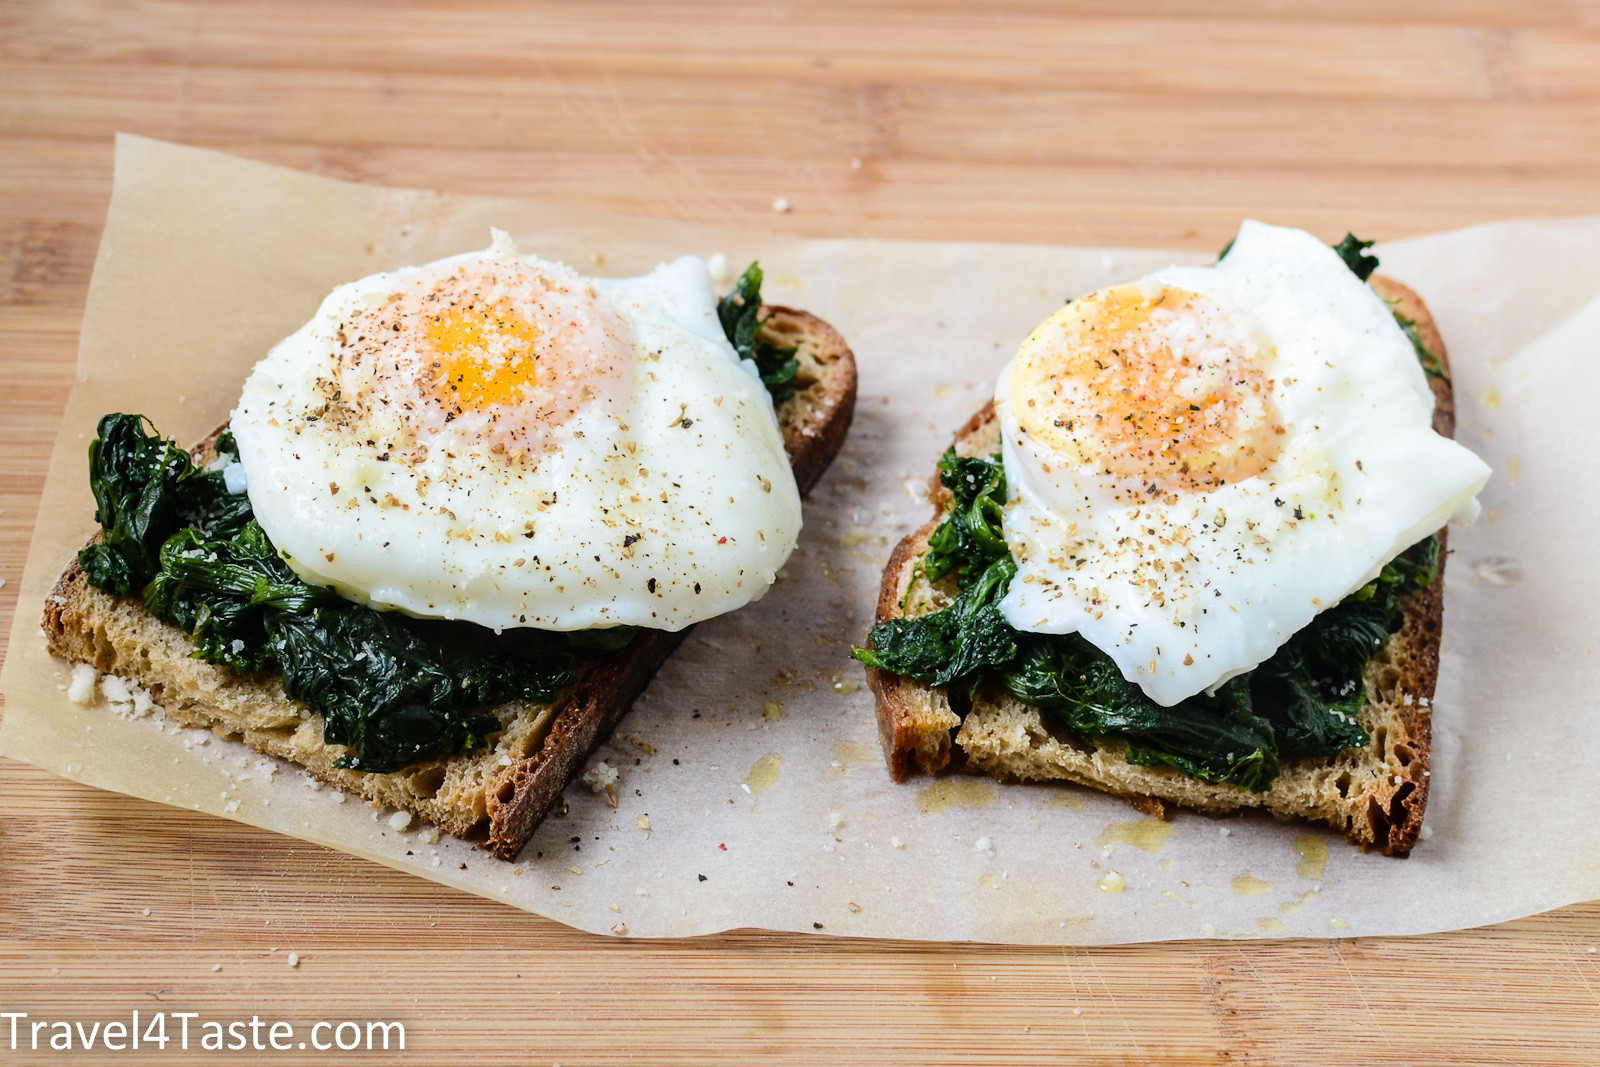 Spinach Breakfast Recipes
 15 minutes Breakfast Recipe Toast with Spinach and Egg